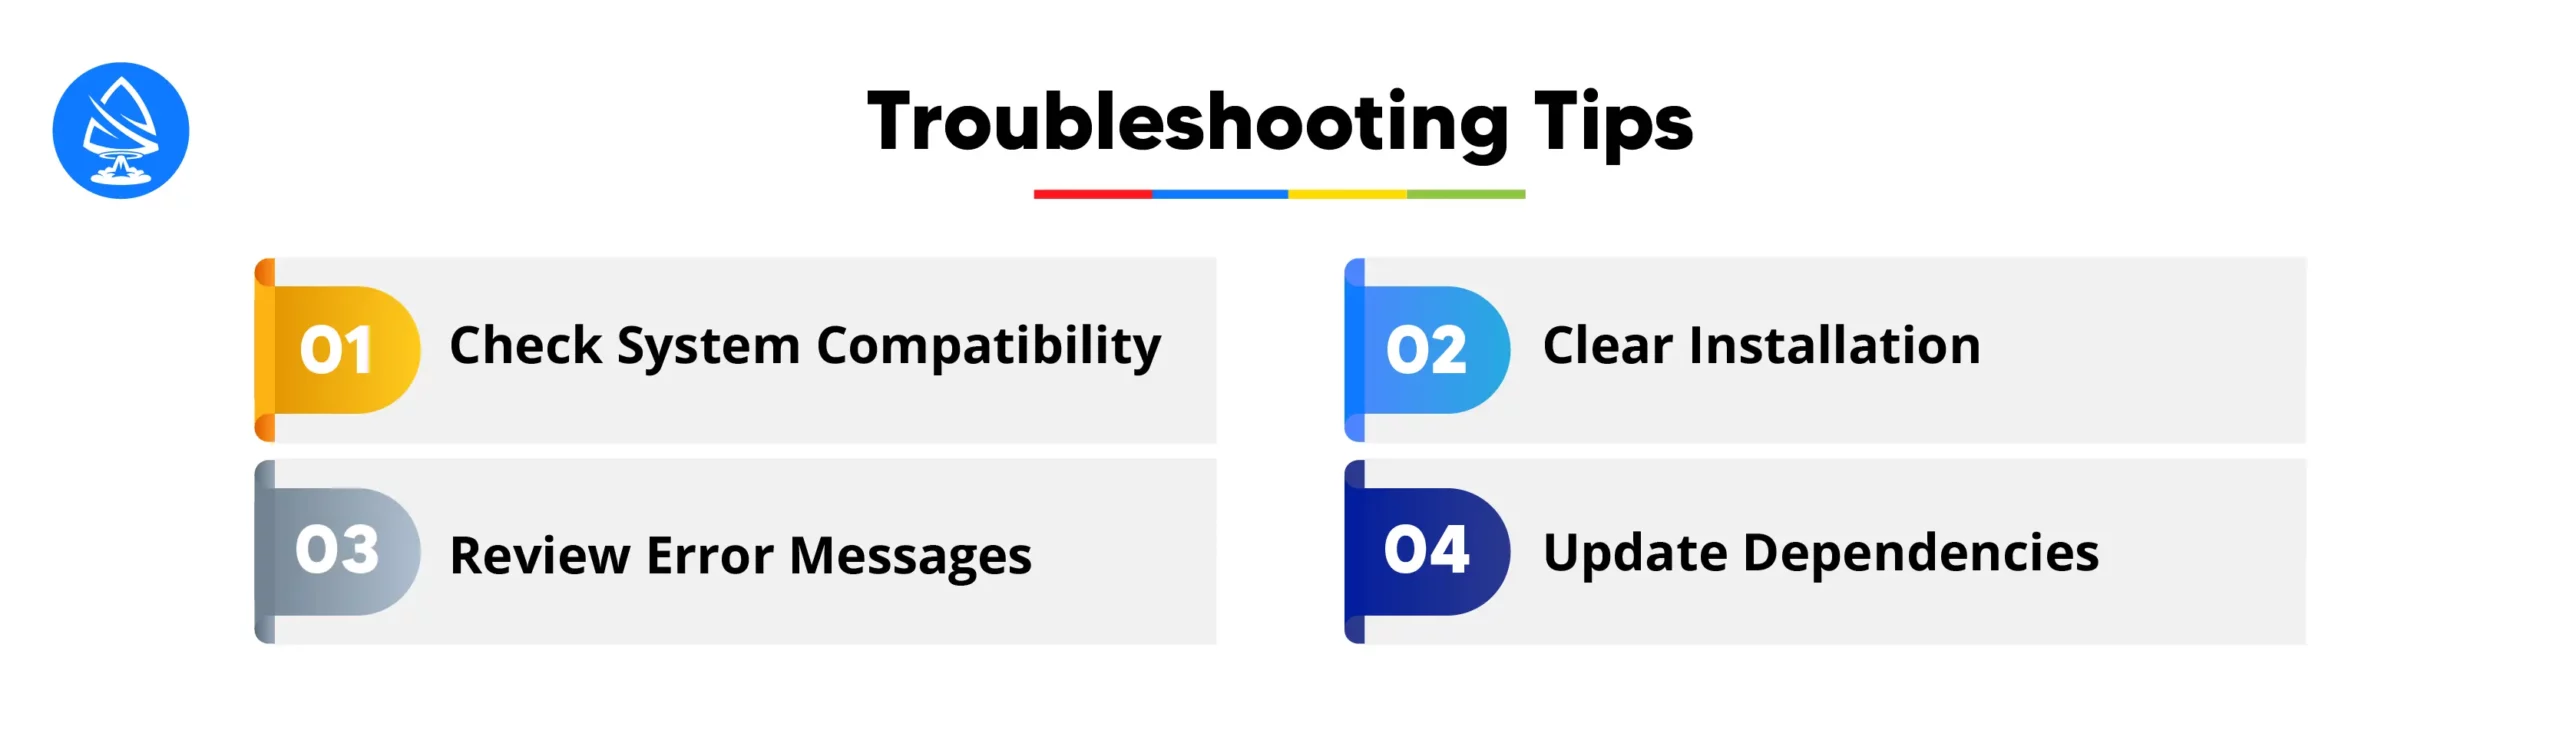 Troubleshooting Tips and Solutions for Resolving Installation Problems 